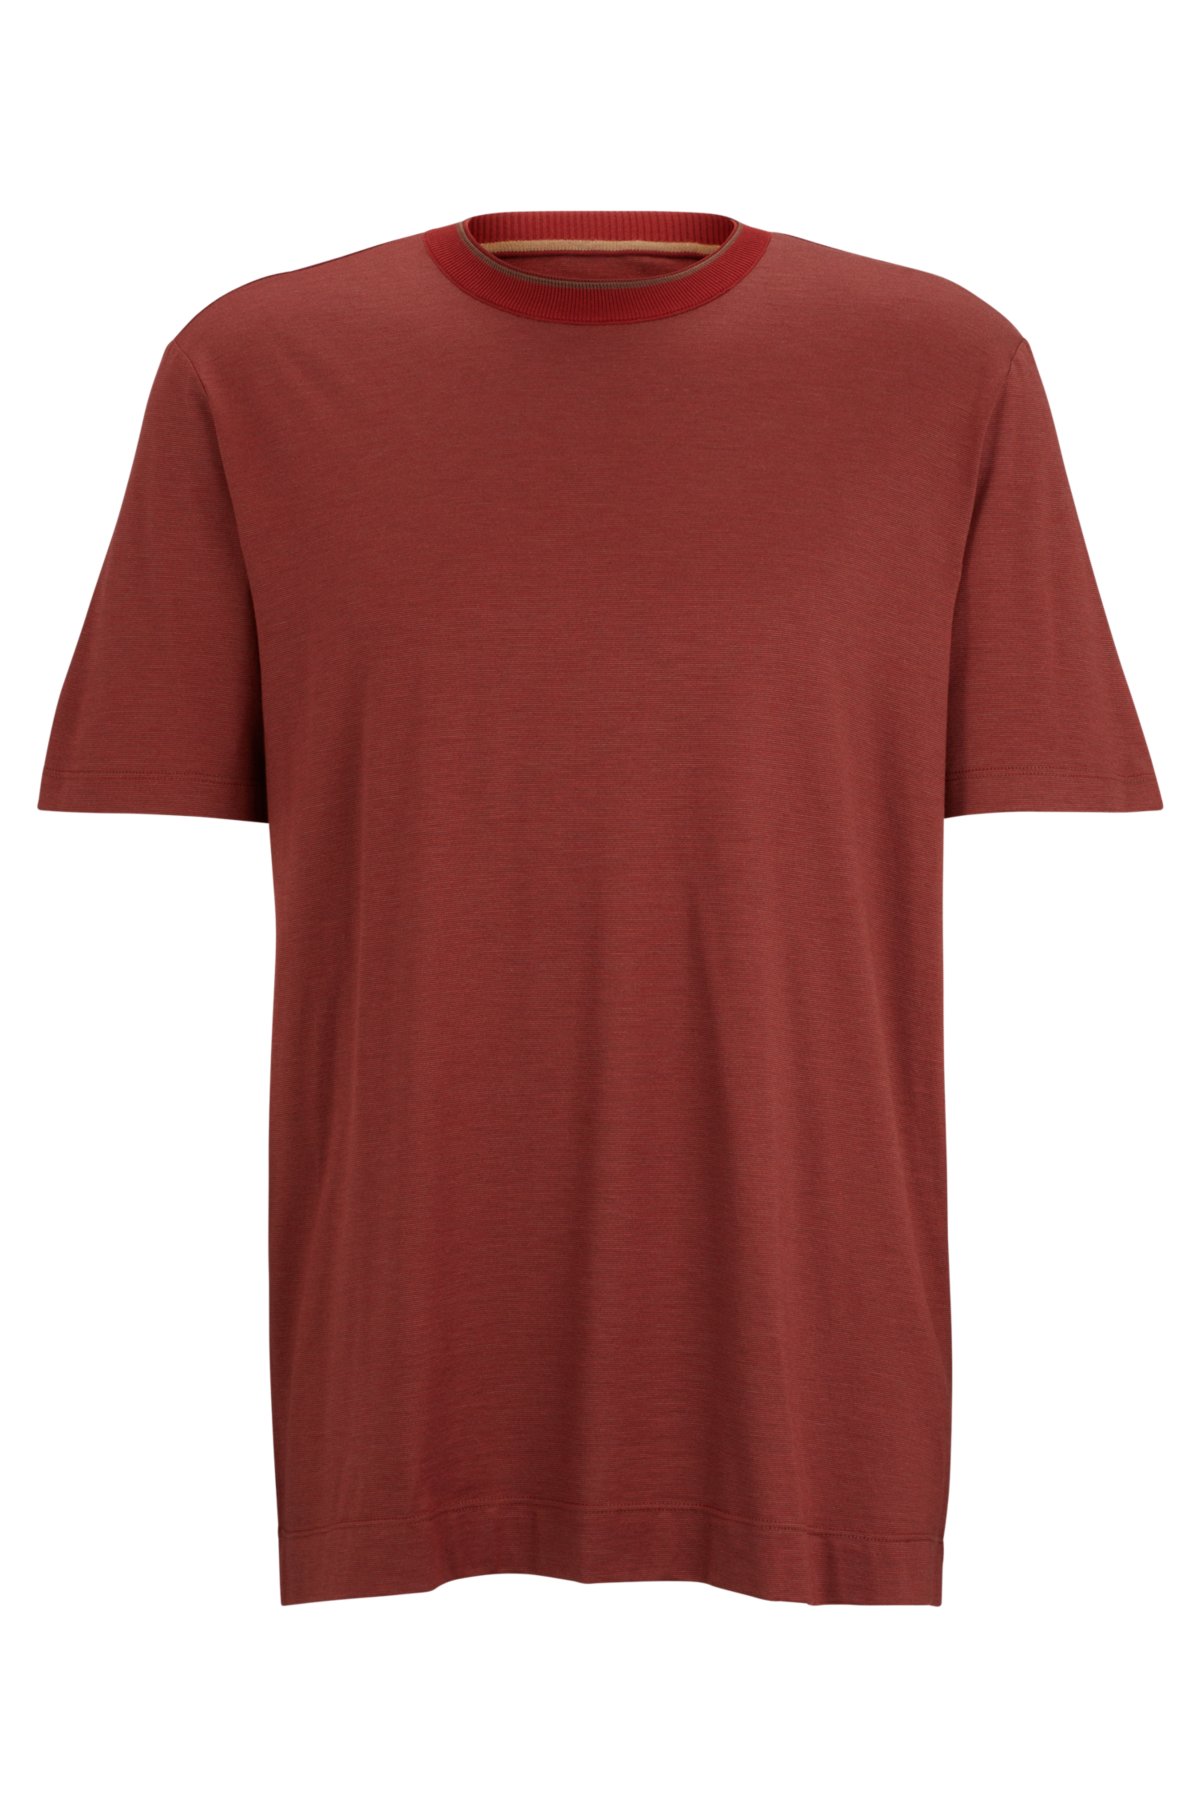 Cotton-silk T-shirt with fineline stripes and double collar, Red